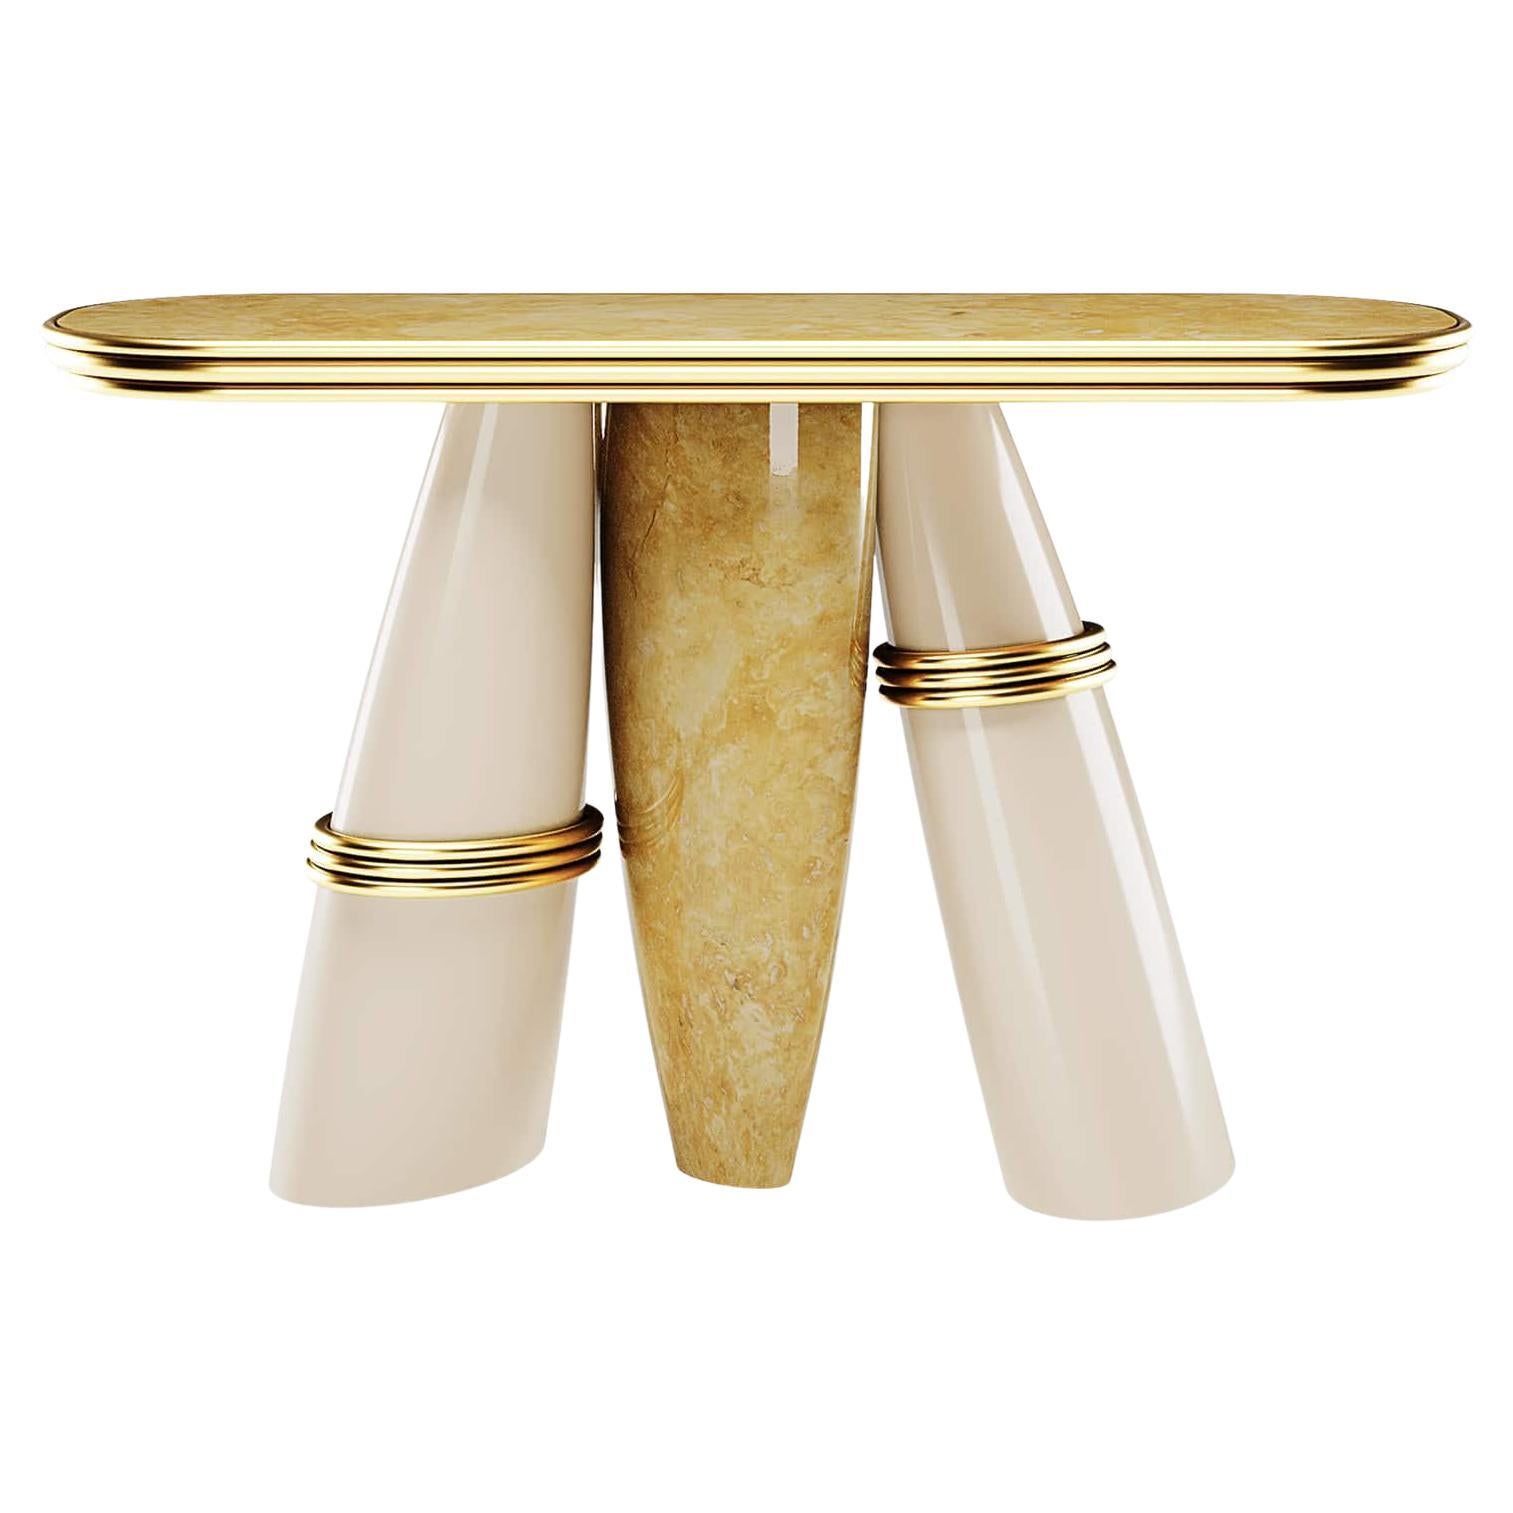 Modern Marble Console Table With Yellow Negrais Lacquer & Polished Brass Details